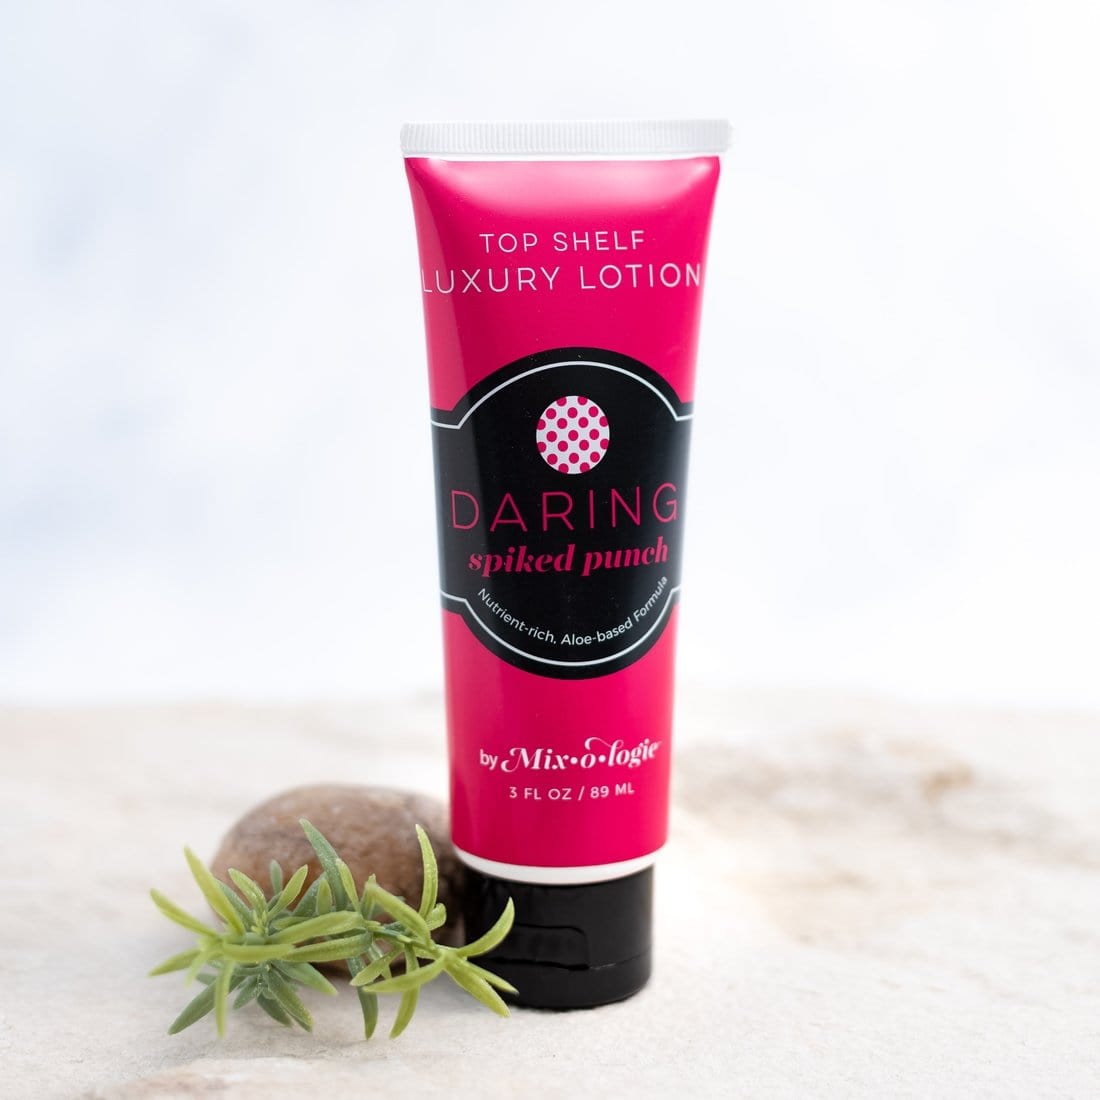 Top Shelf Luxury Lotion - Daring (spiked punch)